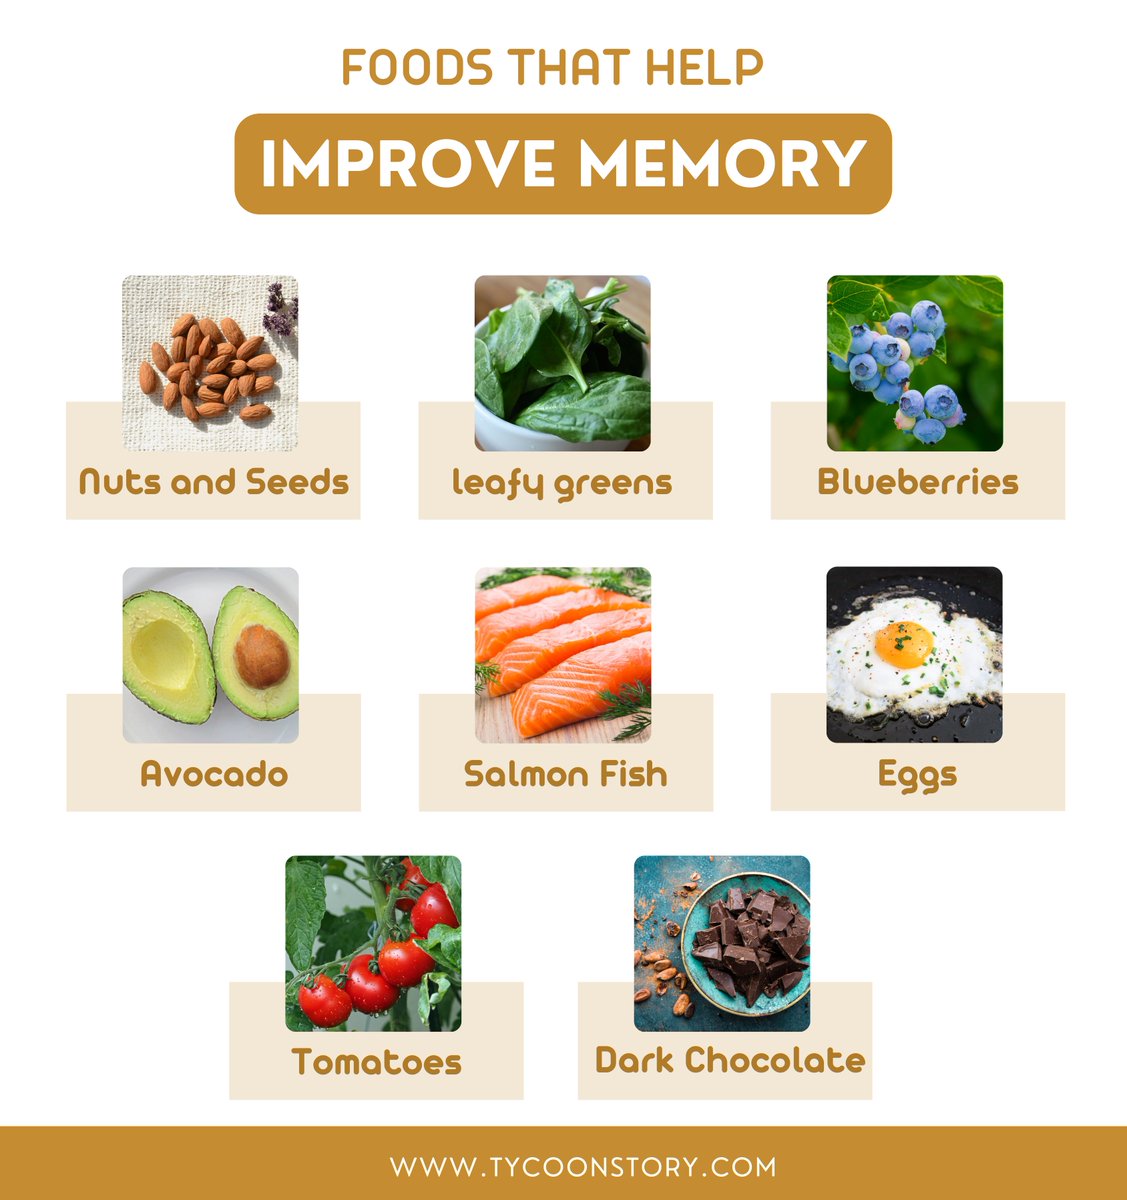 Memory-Boosting Foods: Enhance Brain Health Naturally #SuperfoodBoost #NutritionNourishment #BrainHealth #Omega3Rich #HealthyEating #AntioxidantRich #EatWellFeelWell #HealthyLiving #FoodForThought #WellnessJourney @Healthline @EatingWell @cleaneatingmag